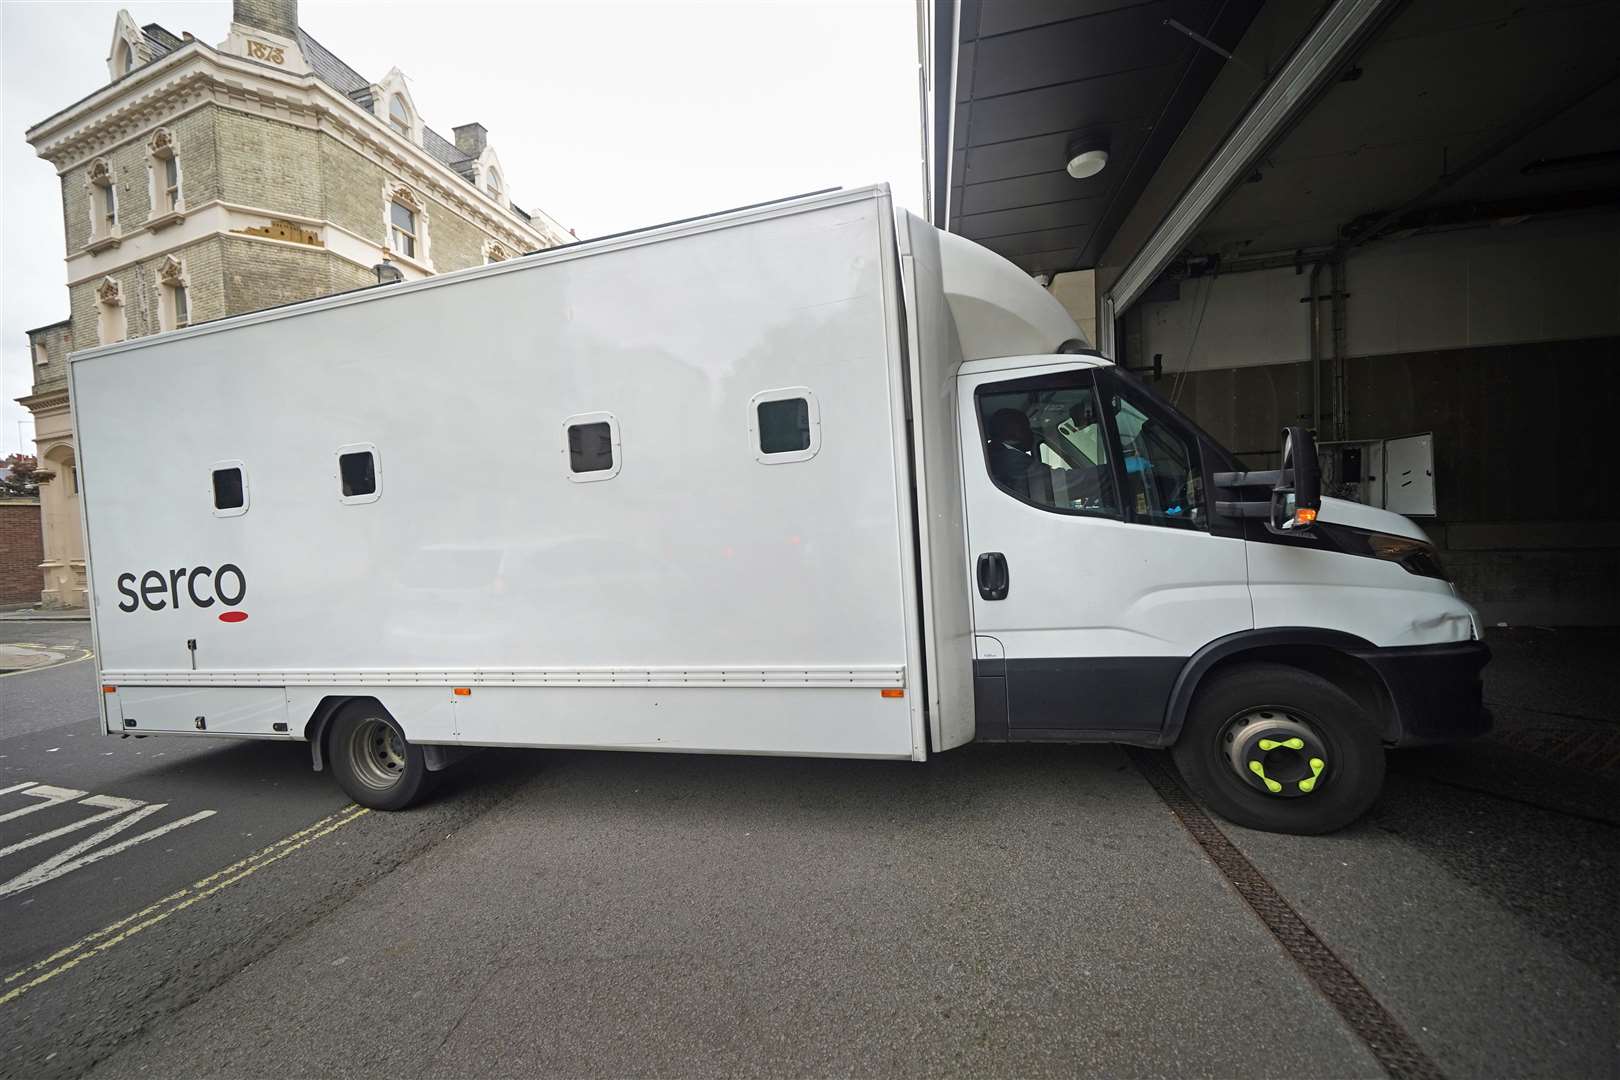 A custody van arrives at Westminster Magistrates’ Court, where three men are appearing charged under the National Security Act of assisting a foreign intelligence service in Hong Kong (Yui Mok/PA)